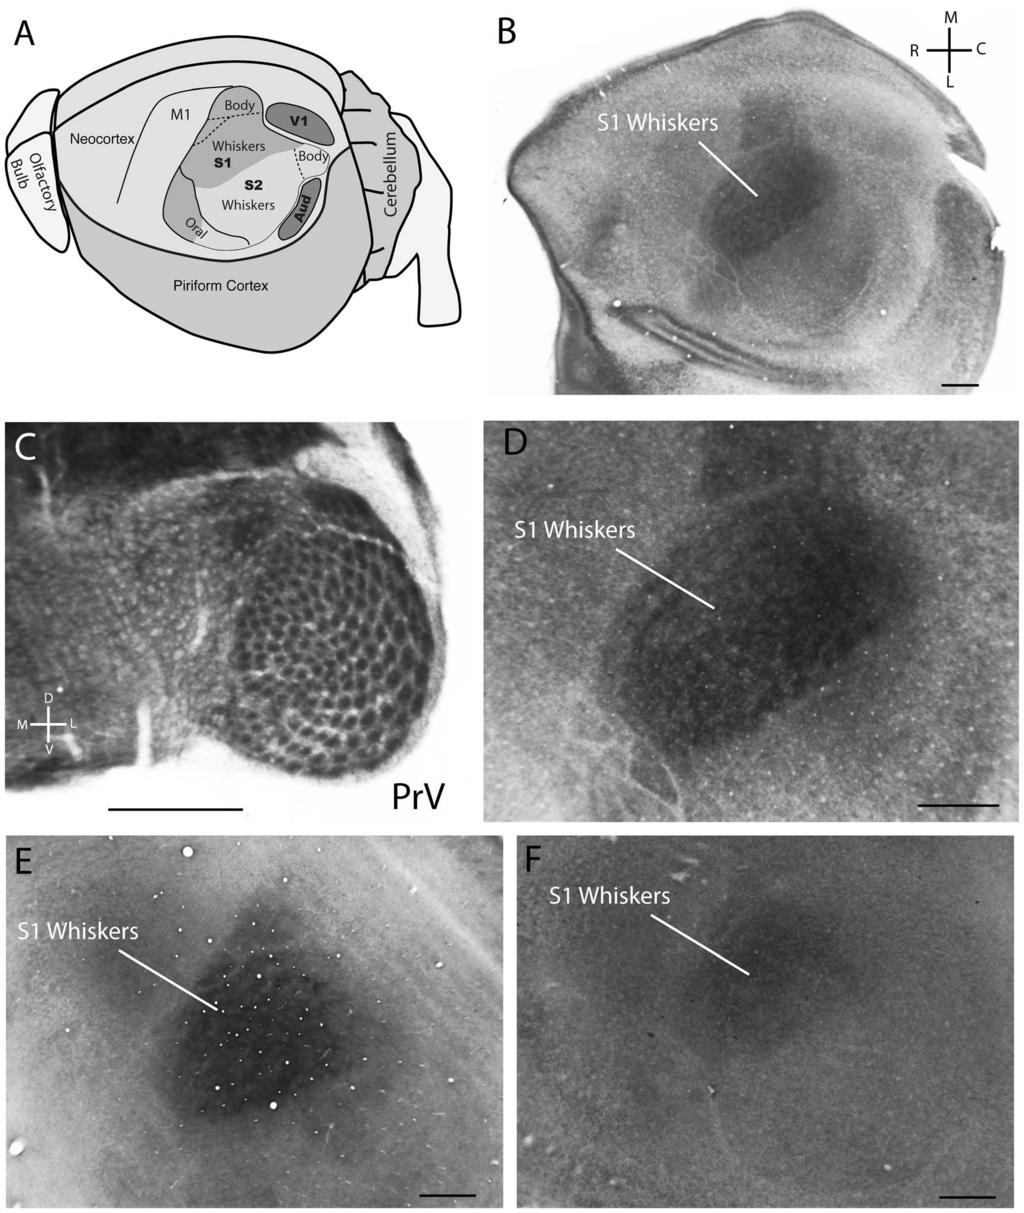 Figure 5. Histology of PrV and cortex from juvenile water shrews. A. The organization of neocortex in the water shrew showing the dominance of the whisker representations in S1 and S2 (after [4]). B.